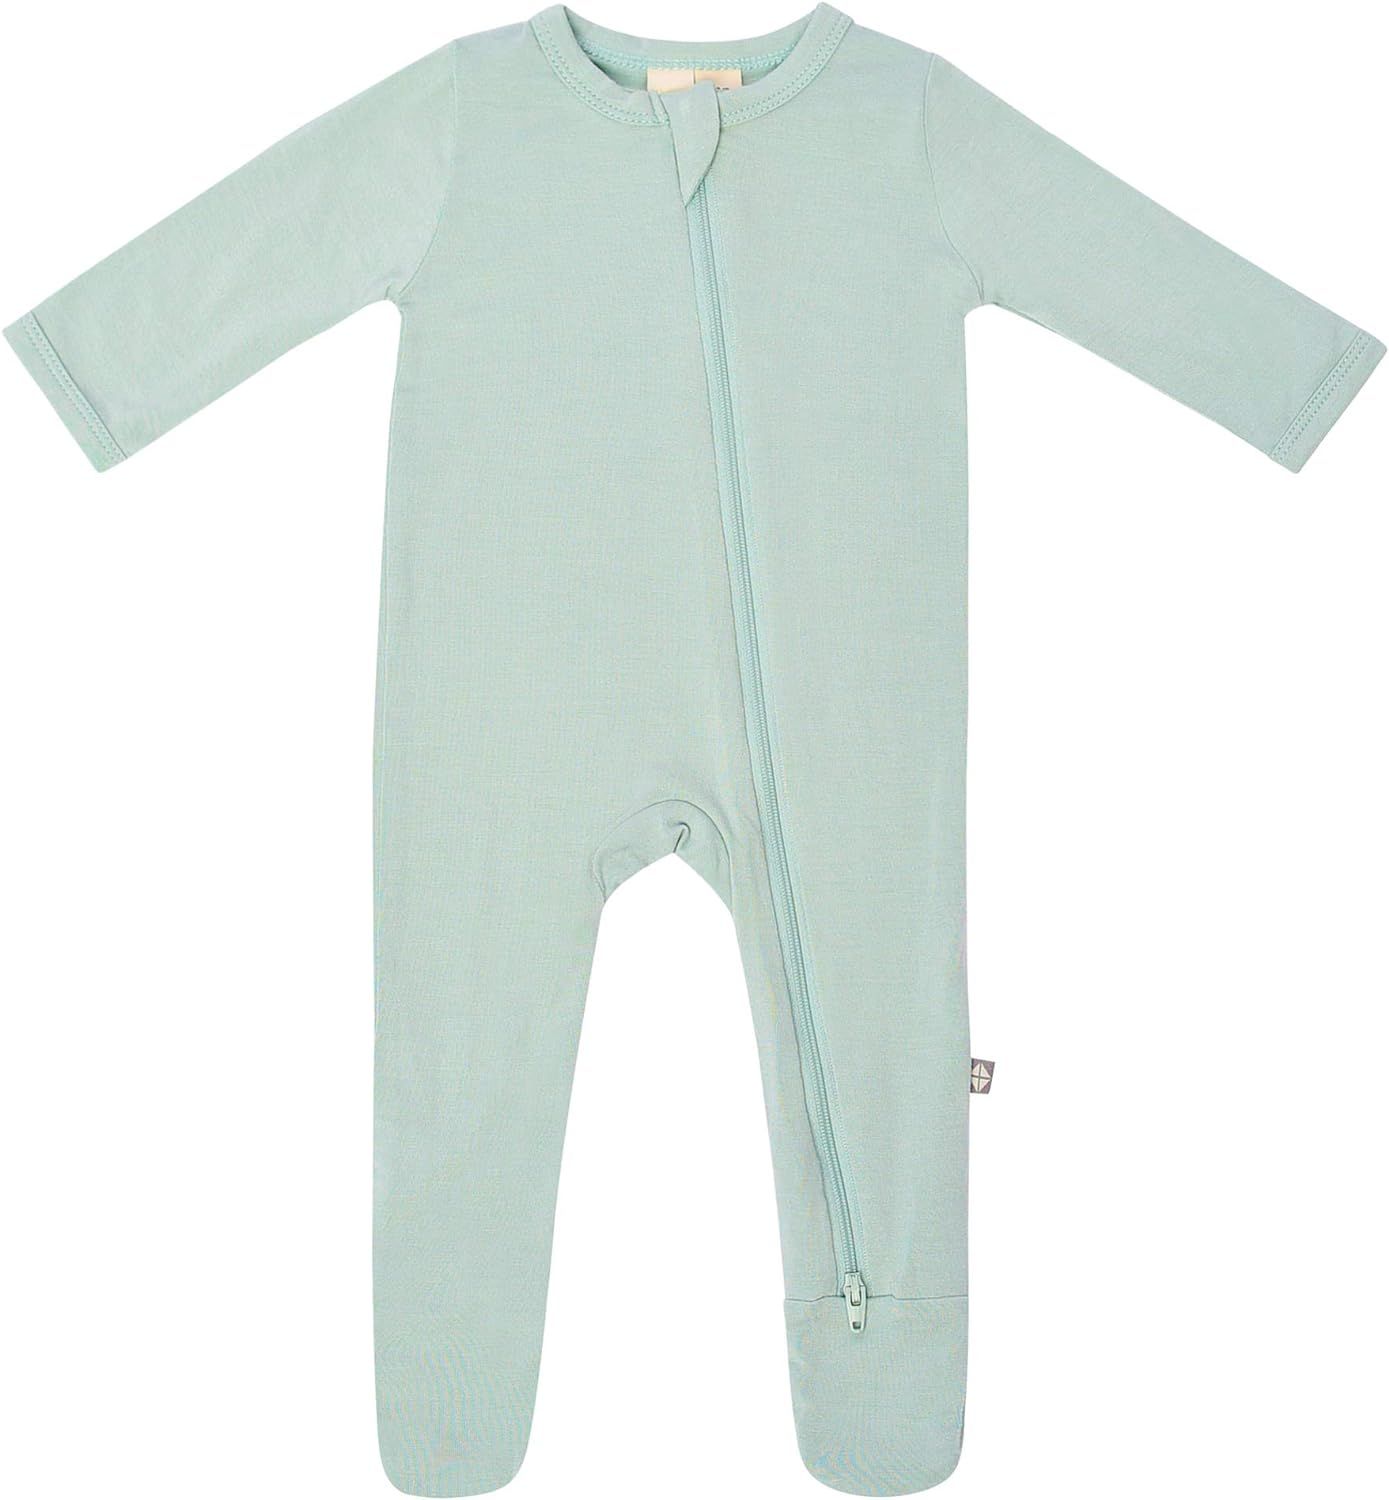 KYTE BABY Soft Bamboo Rayon Footies, Zipper Closure, 0-24 Months | Amazon (US)